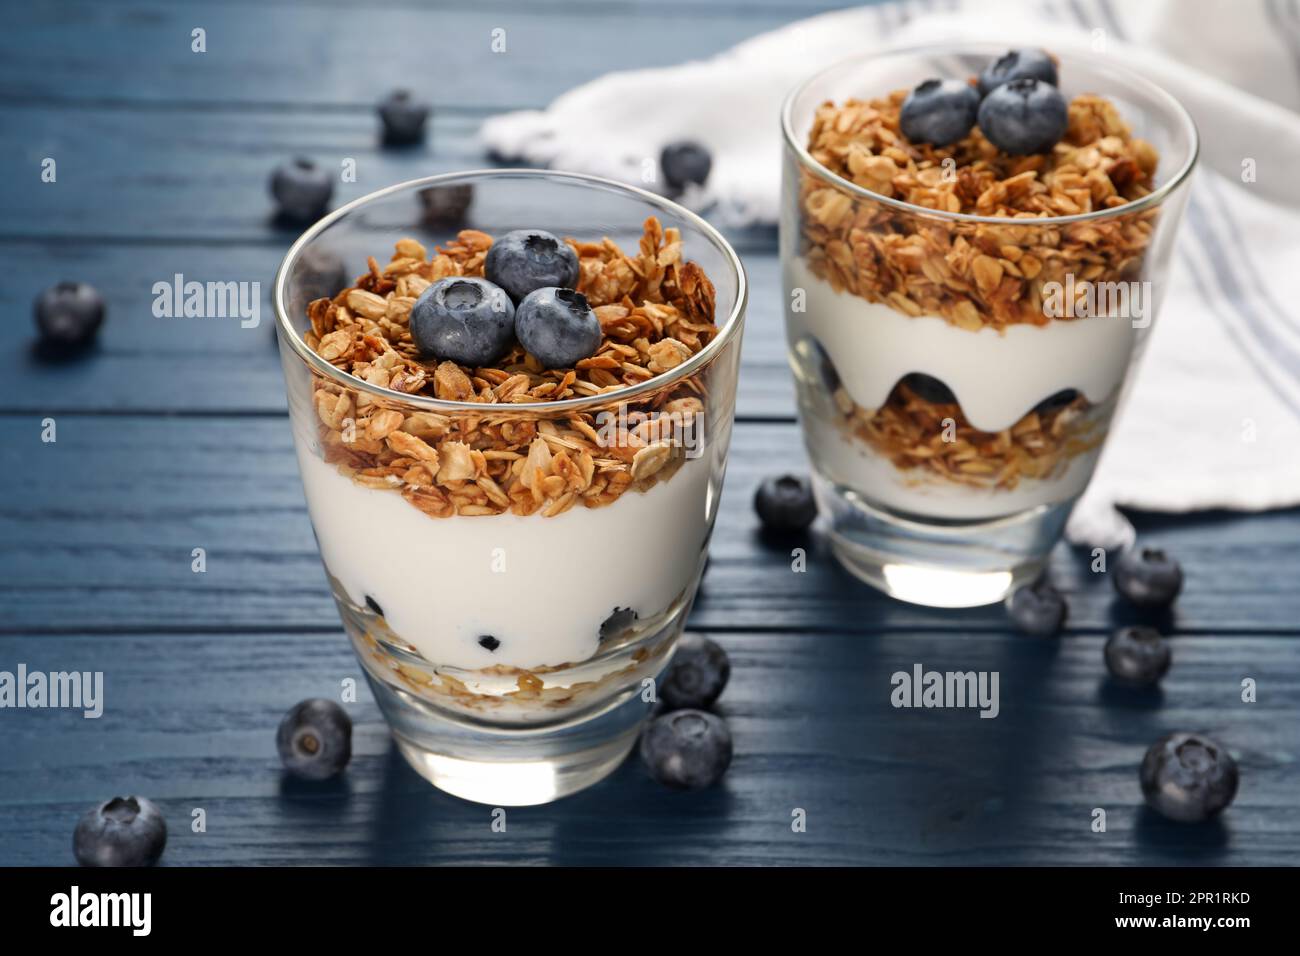 Glasses of tasty yogurt with muesli and blueberries on blue wooden table Stock Photo